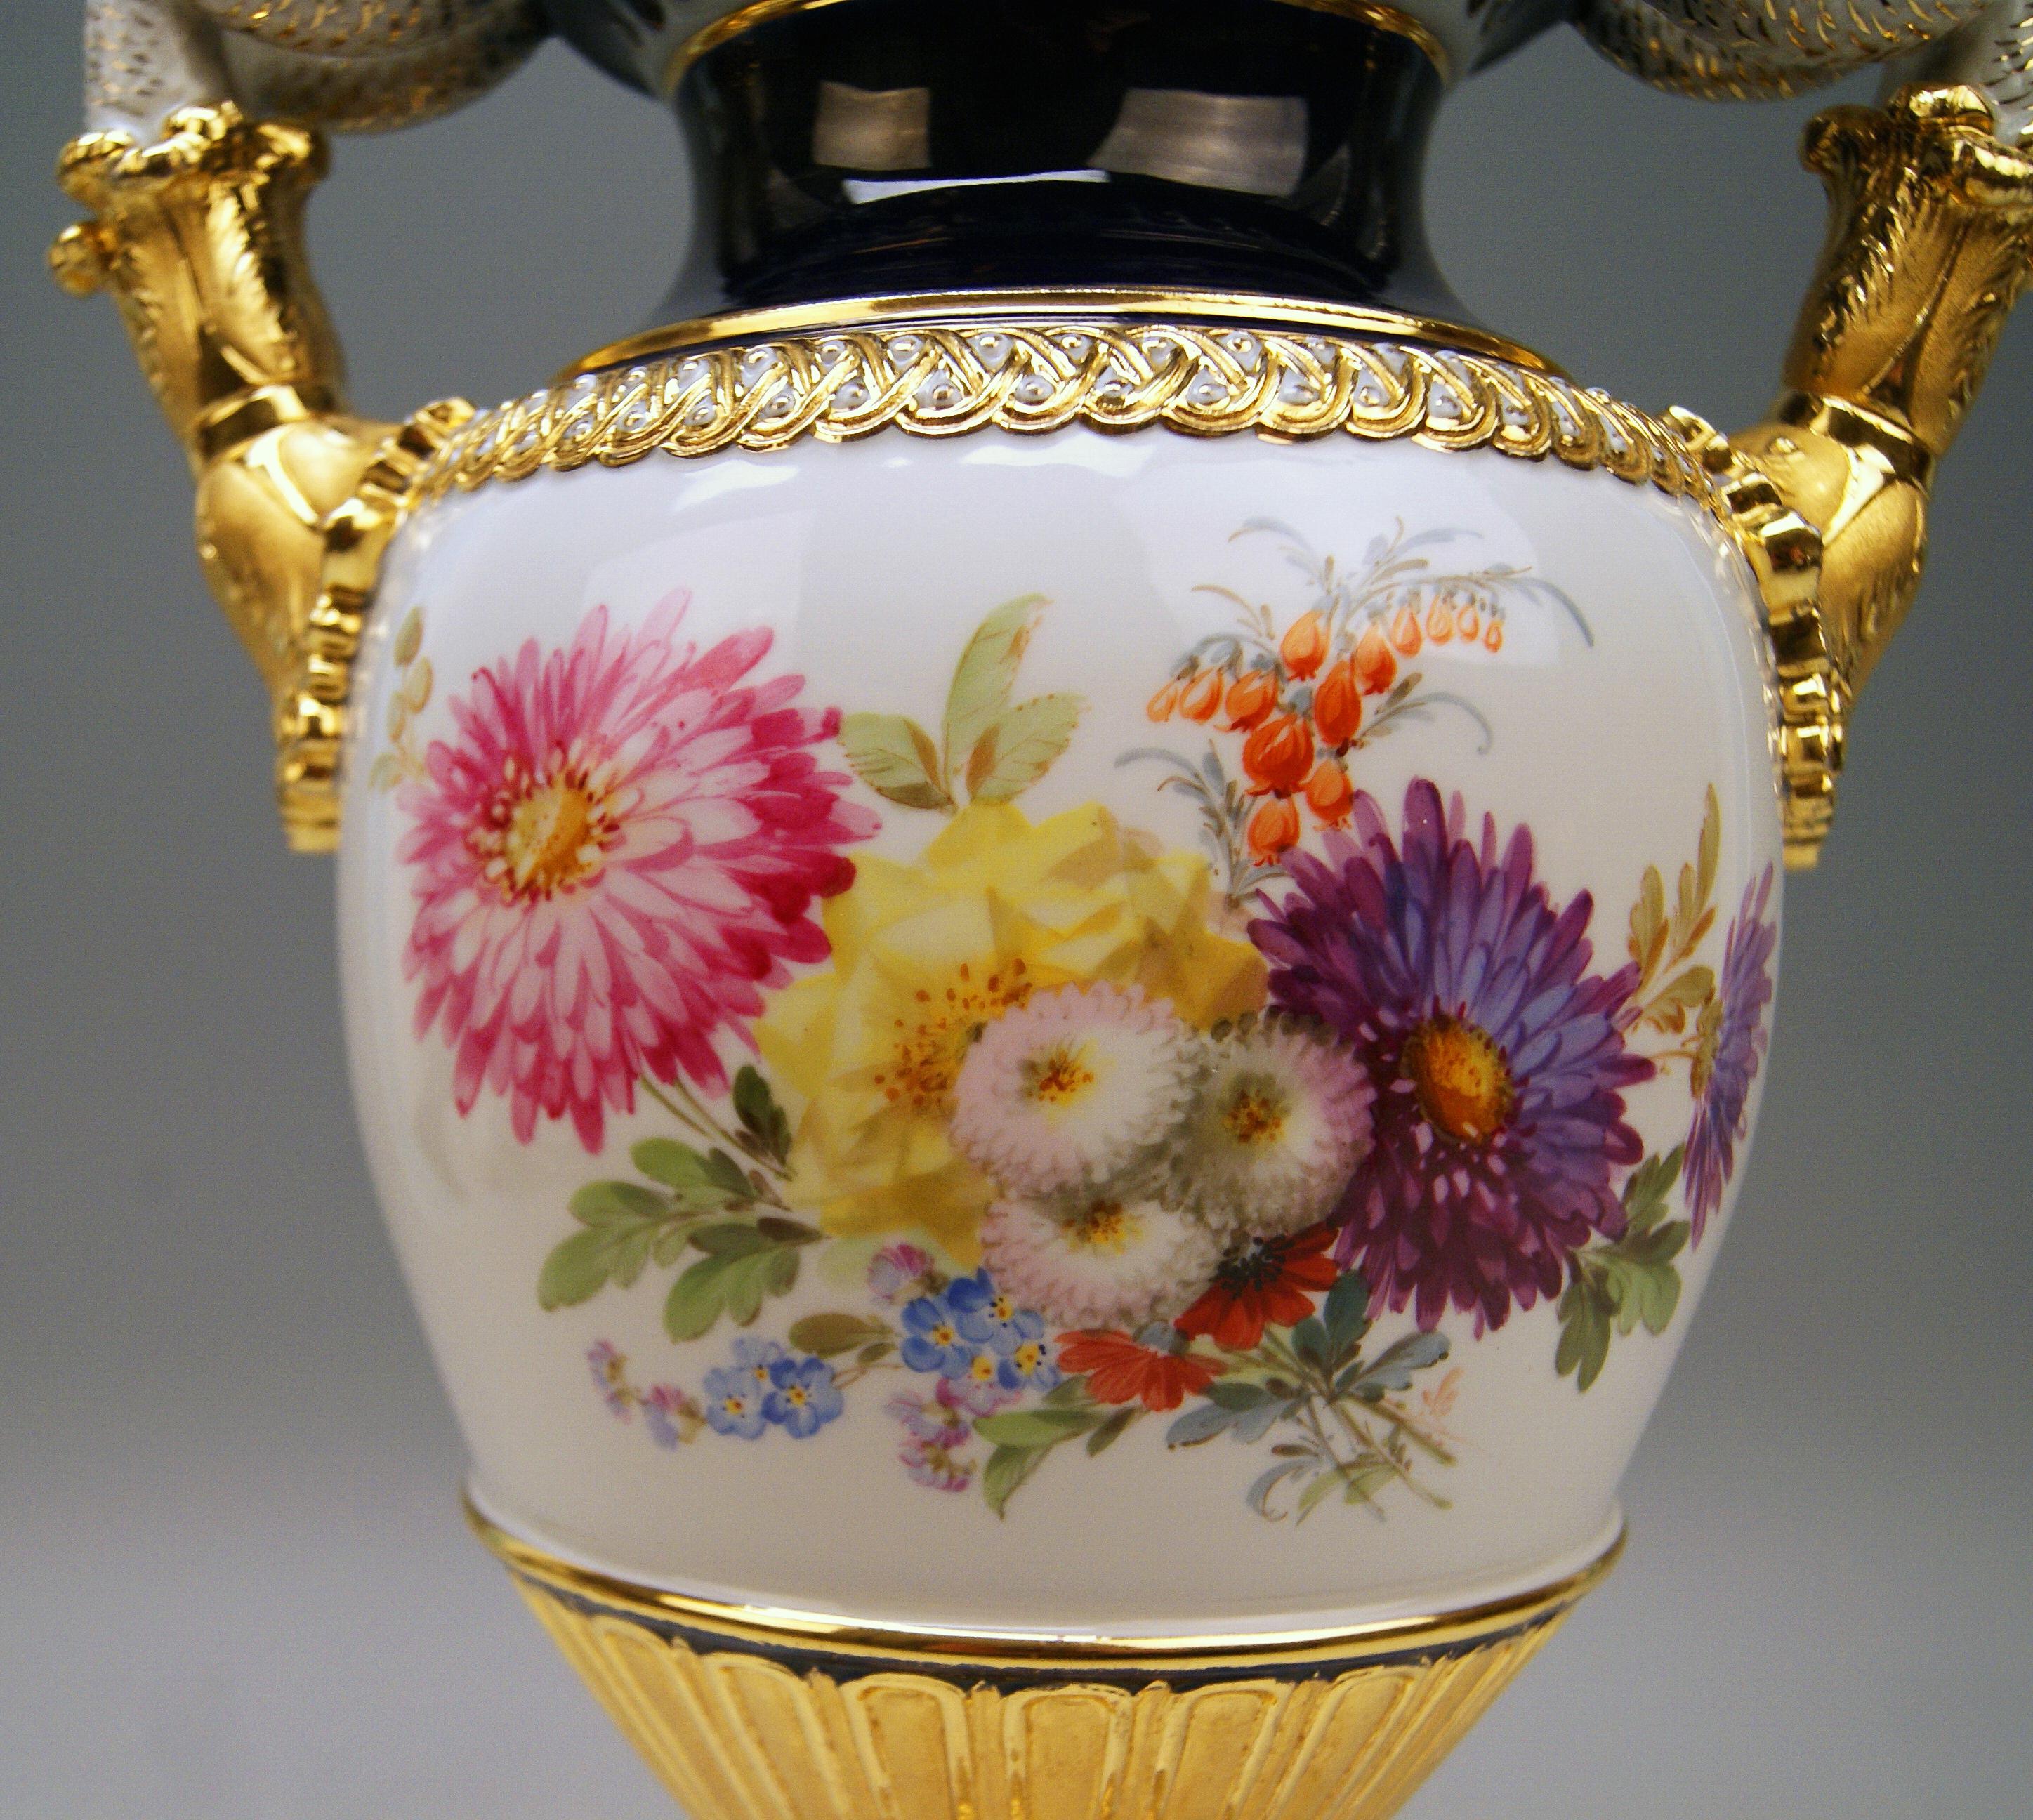 Meissen nicest snake handles vase / designed by Leuteritz 
Please note: Excellently painted with flowers!

Manufactory: Meissen 
Dating: made during 19th century (circa 1870)
Hallmarked: Meissen Mark with Pommels on Hilts (= 19th century)
First